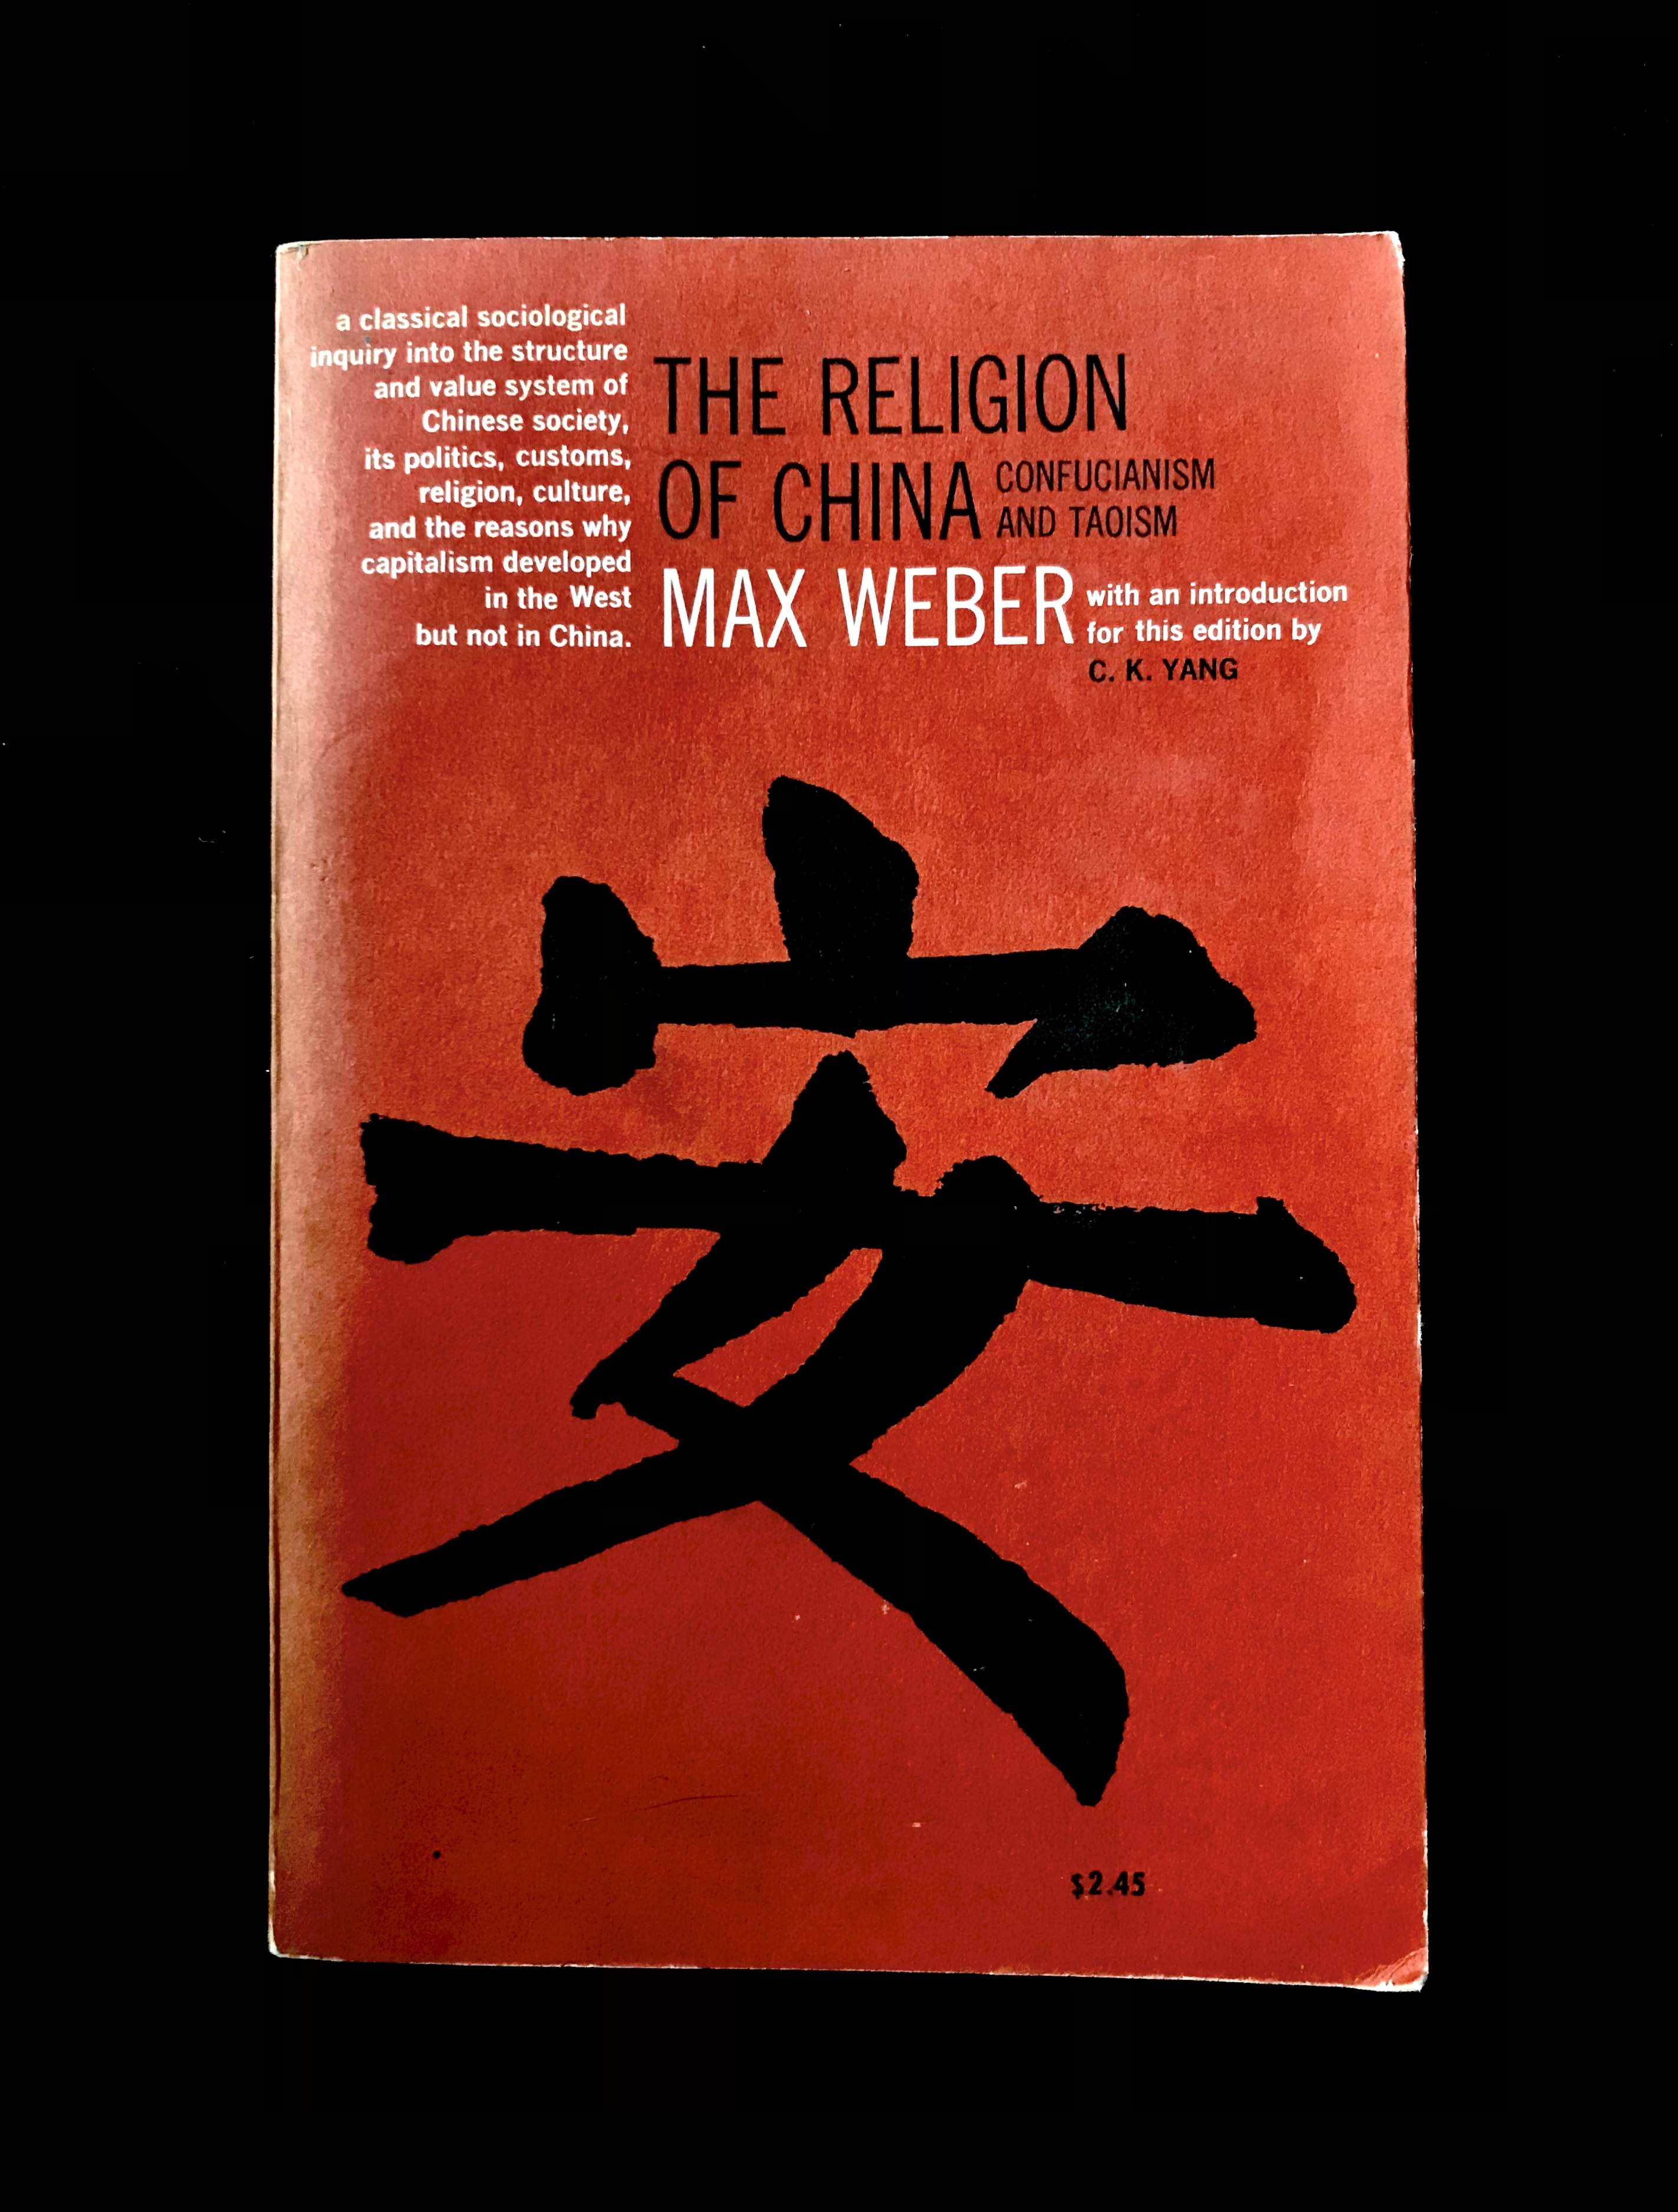 The Religion of China: Confucianism and Taoism by Max Weber